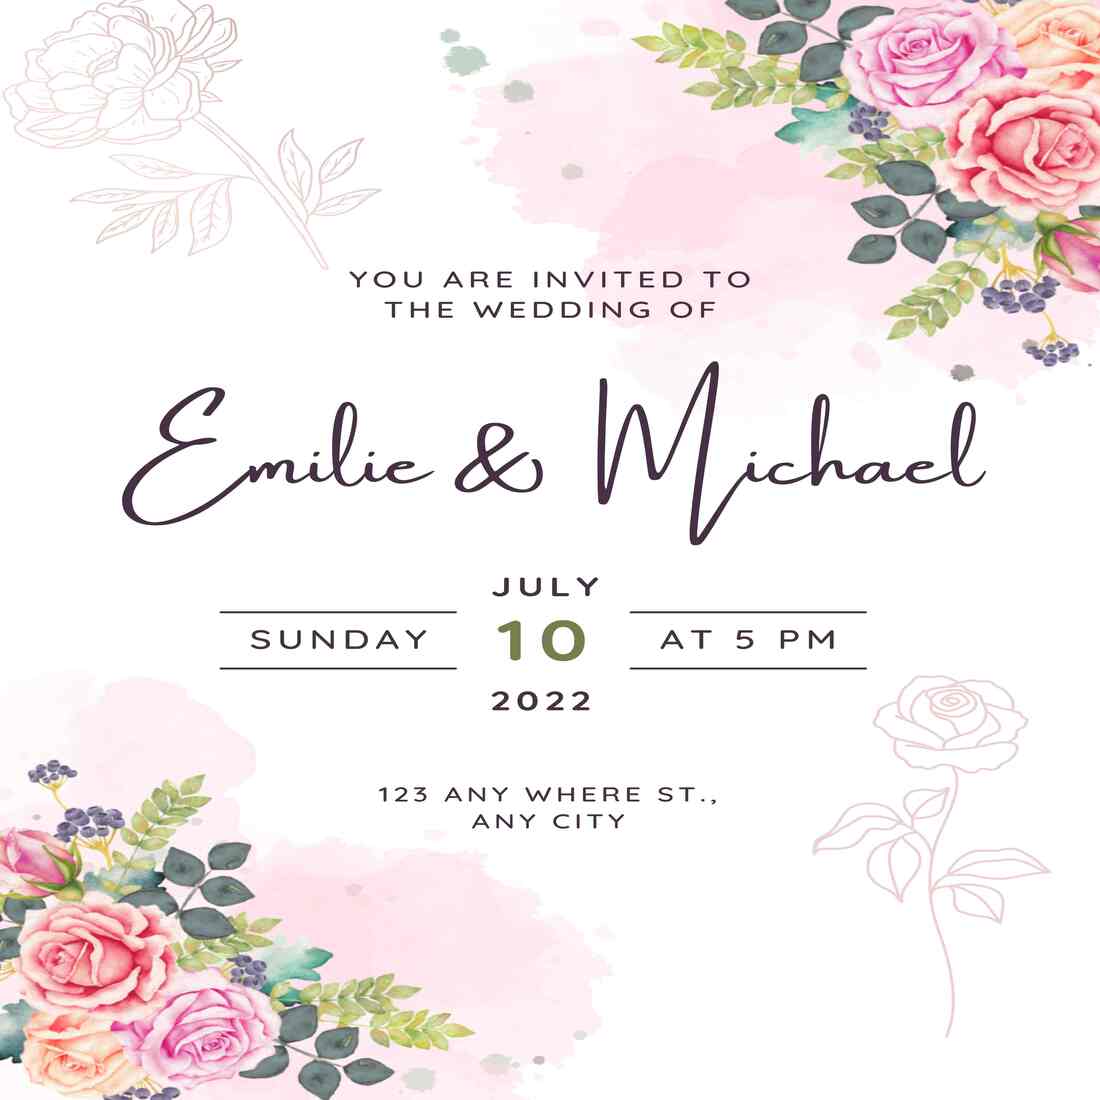 Use this invitation for your wedding guests.